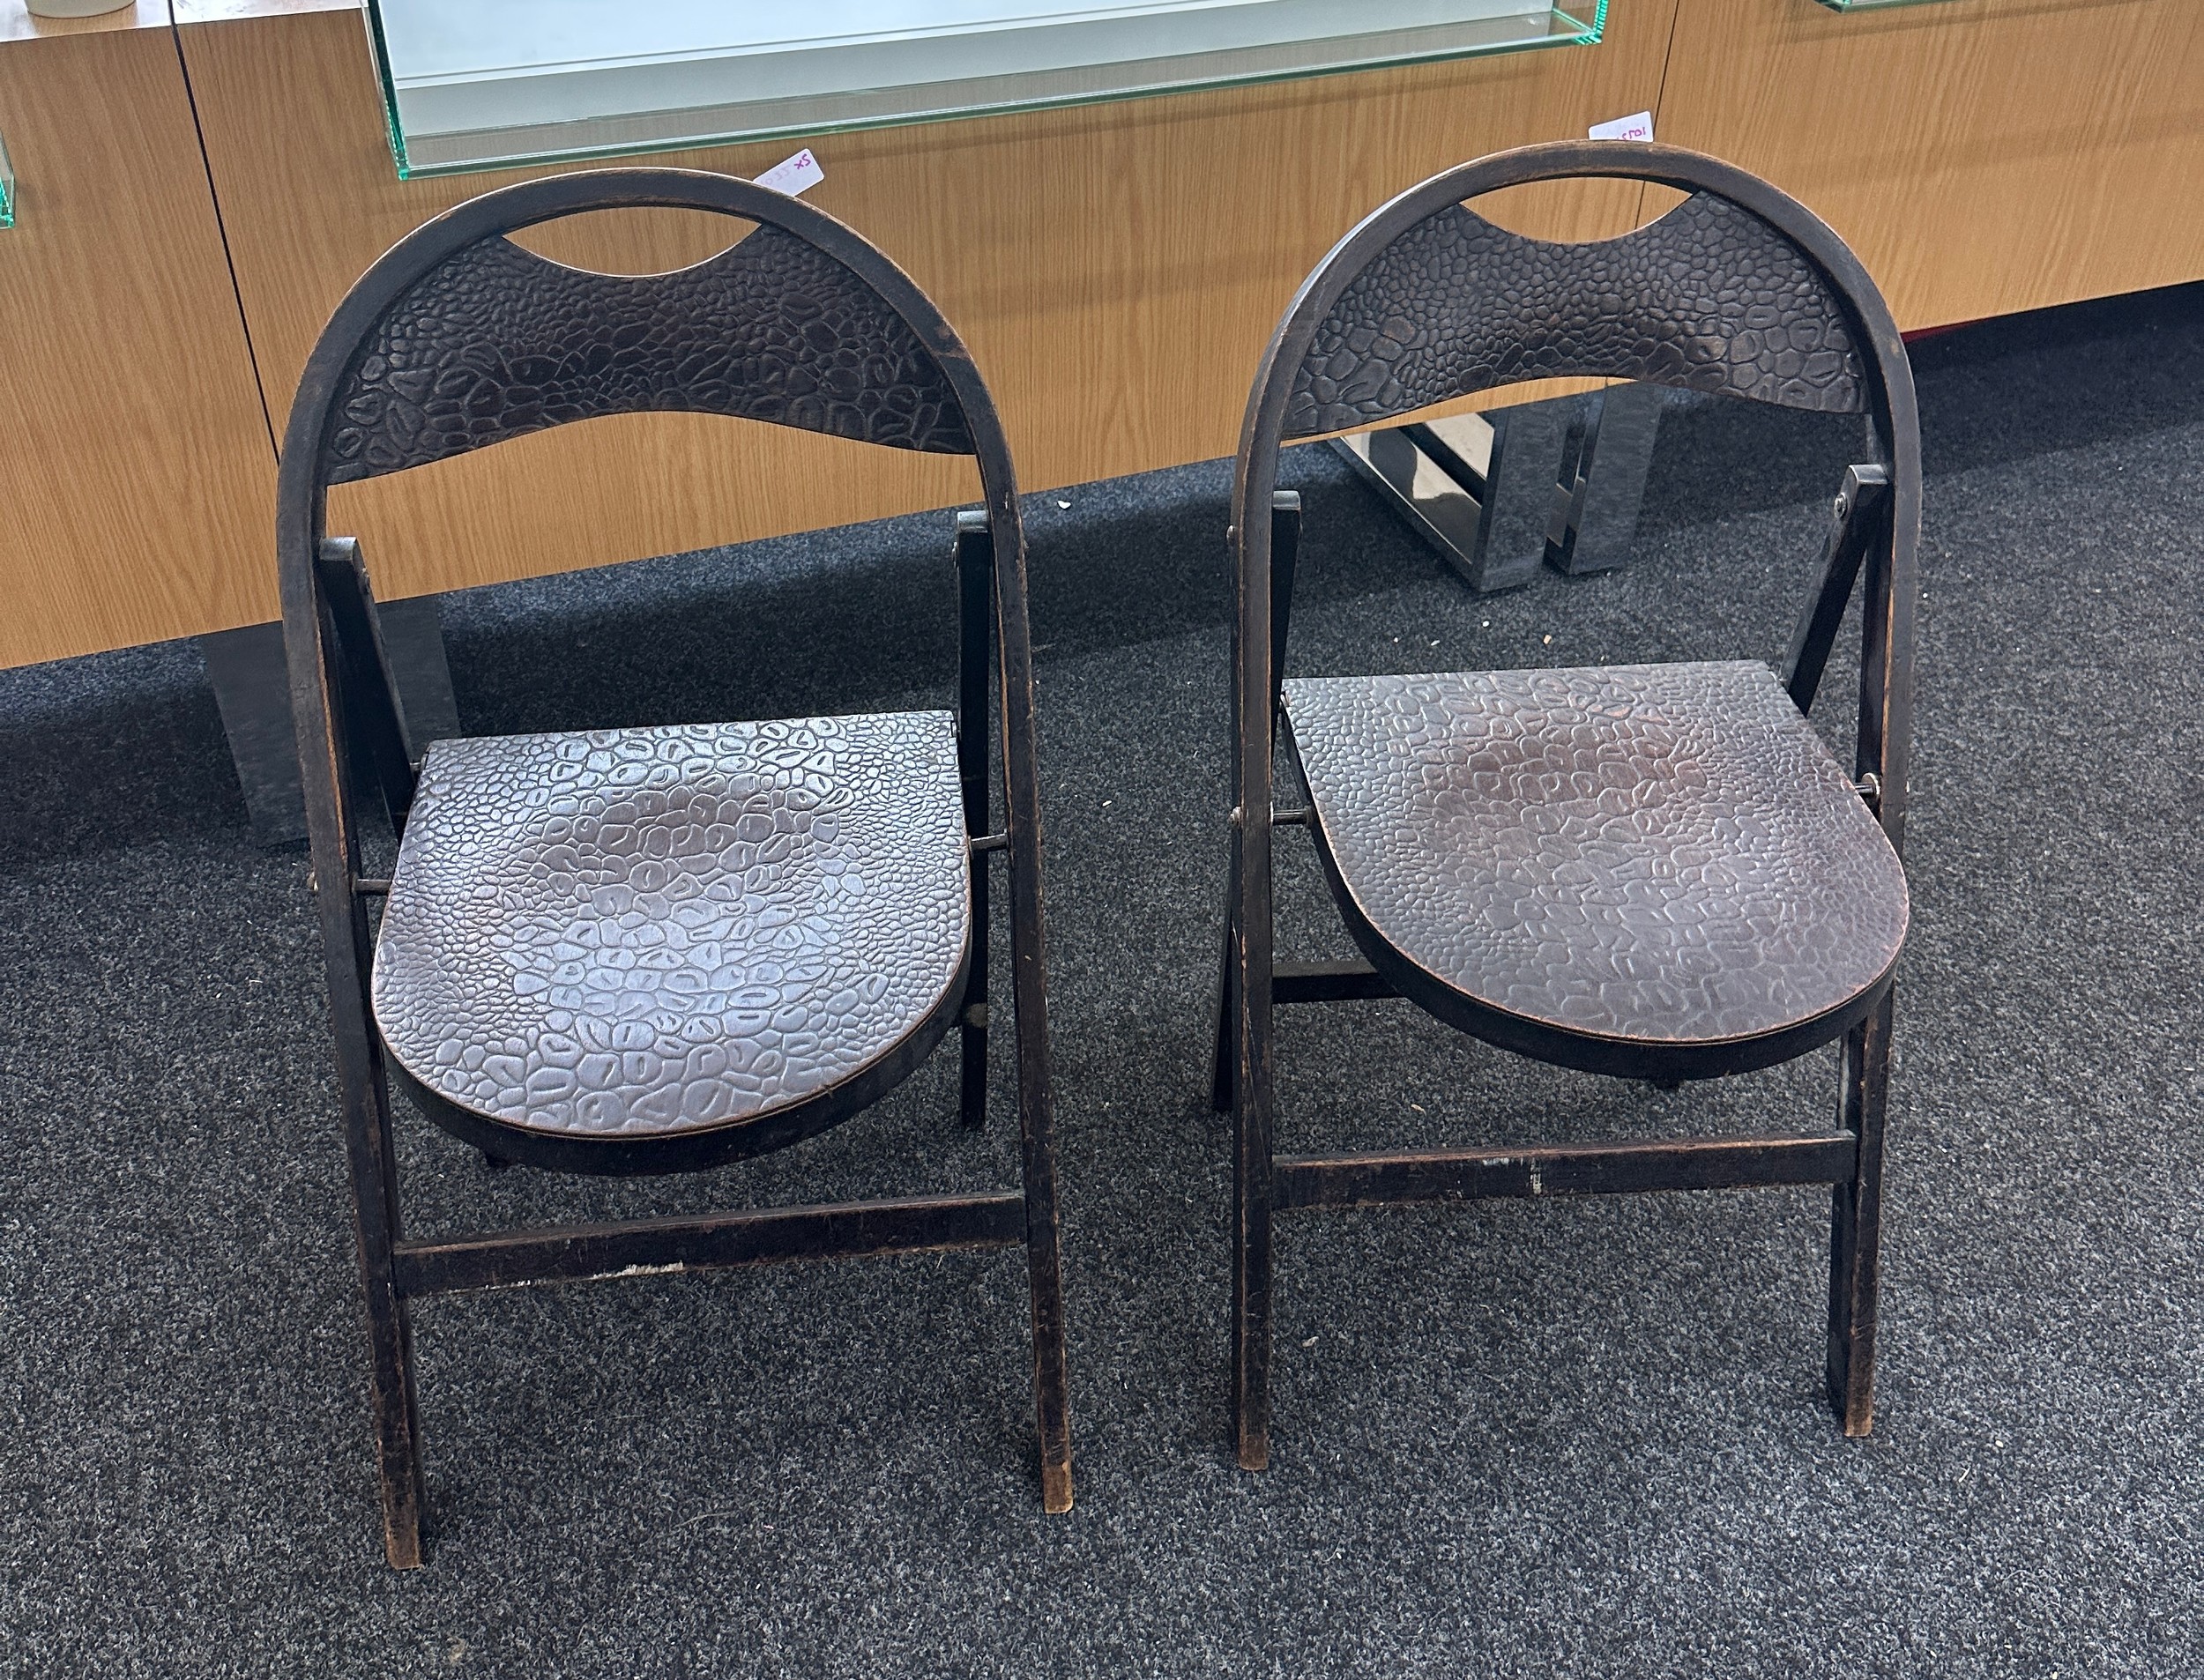 2 Folding textured chairs